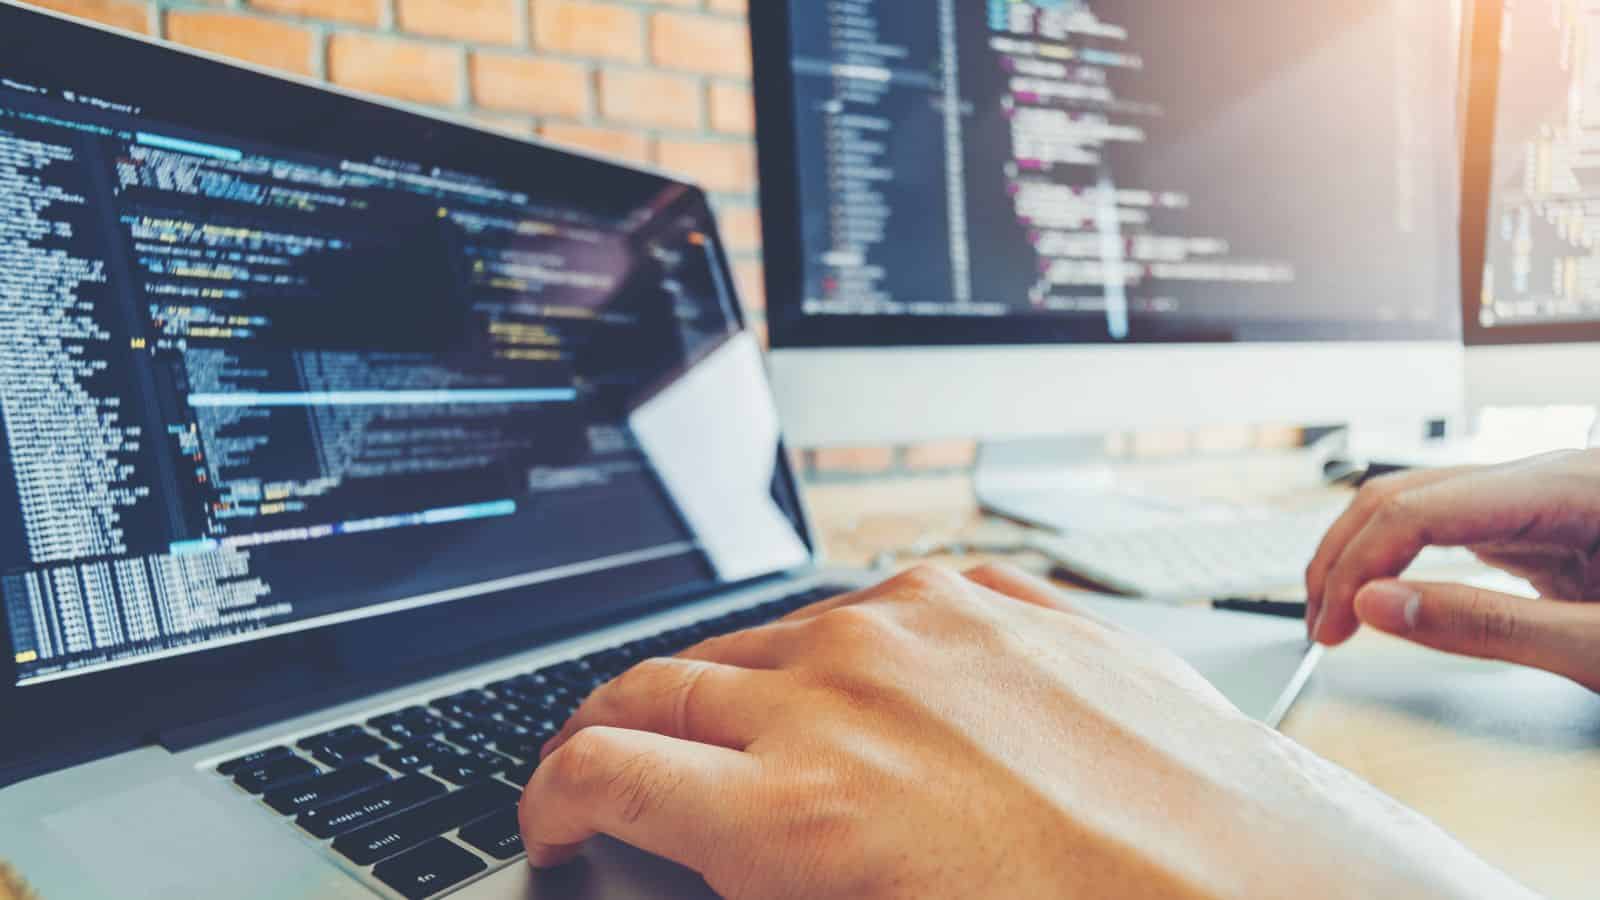 <p>Web developers use programming languages like HTML, CSS, and JavaScript to write code and convert a web design, which can be created by either a programmer or a design team, into a website or mobile application. They can expect to earn a salary of around $77,030. The <a href="https://brainstation.io/career-guides/what-does-a-web-developer-do#:~:text=Web%20Developers%20build%20websites%20by,%2C%20product%2C%20or%20mobile%20application.">demand for web developers</a> is expected to grow by 30.3% from 2021 to 2031.</p>